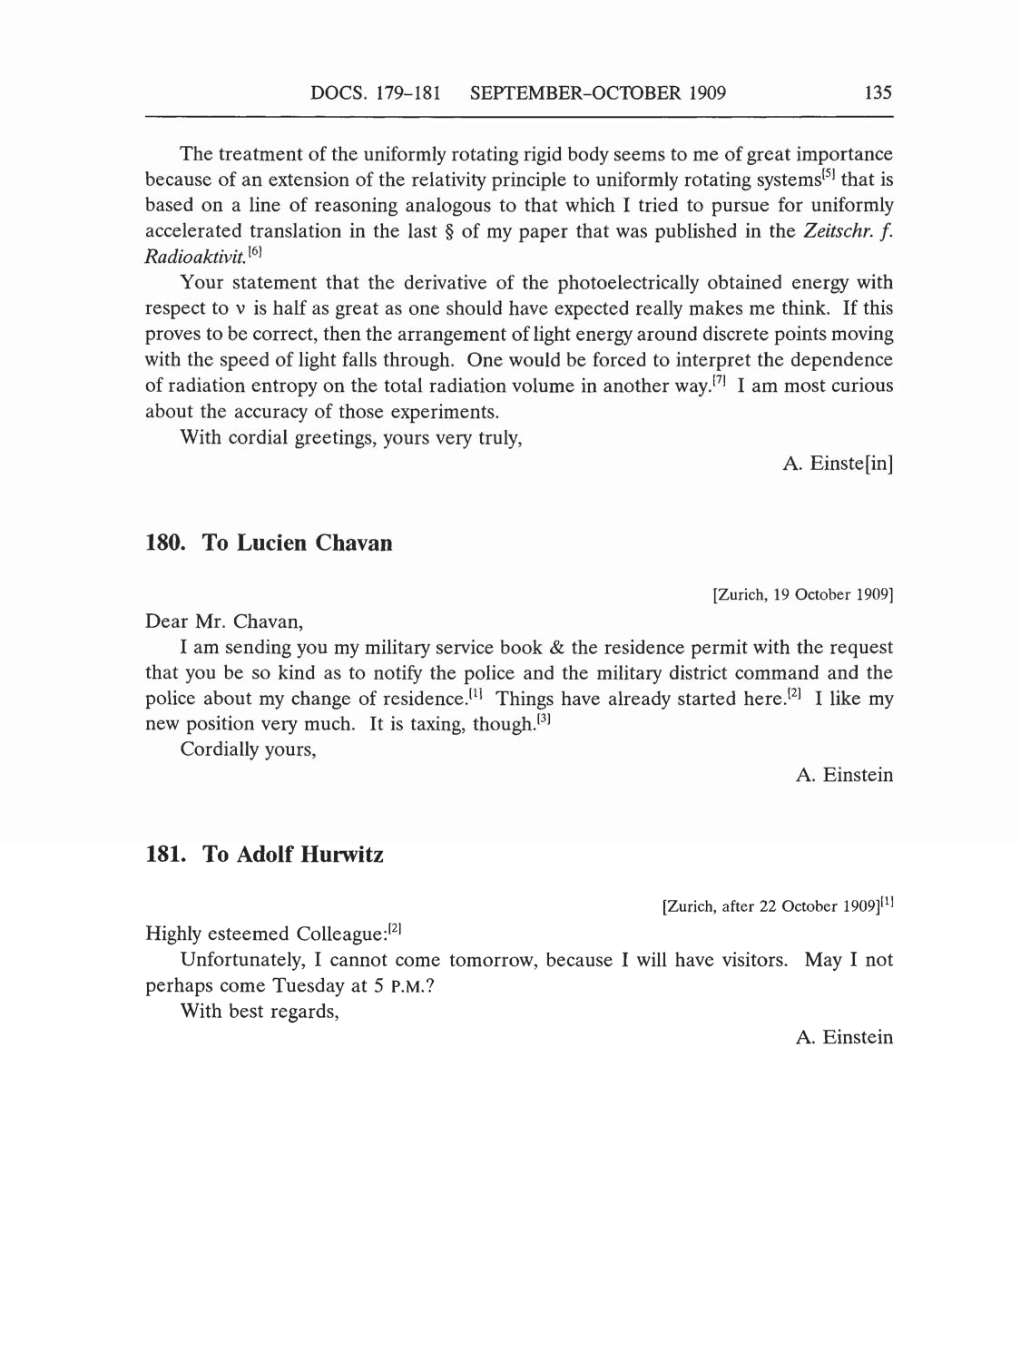 Volume 5: The Swiss Years: Correspondence, 1902-1914 (English translation supplement) page 135